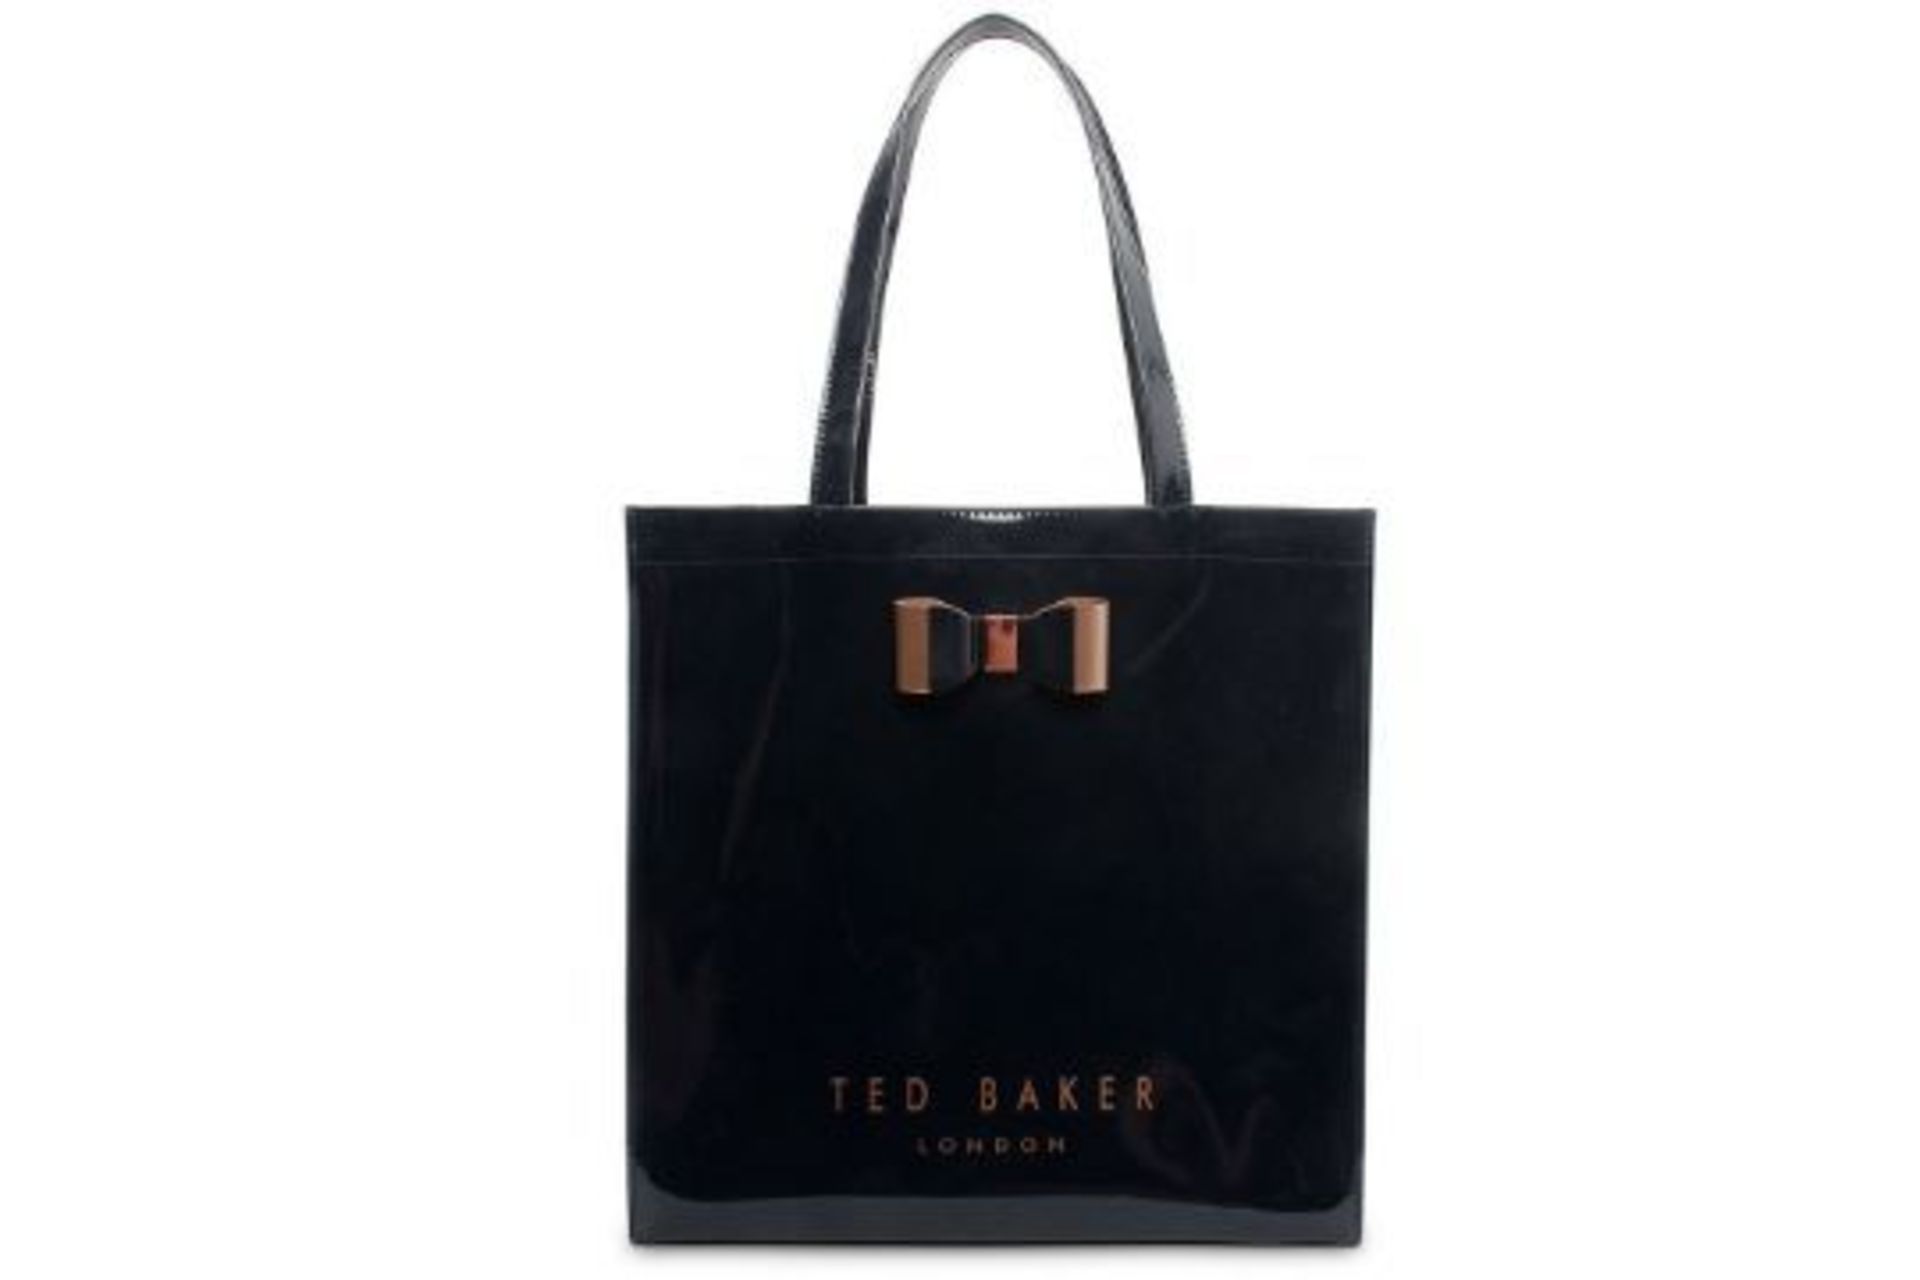 BRAND NEW TED BAKER SOFCOM DARK BLUE LARGE ICON BAG (4244) RRP £49 - 4